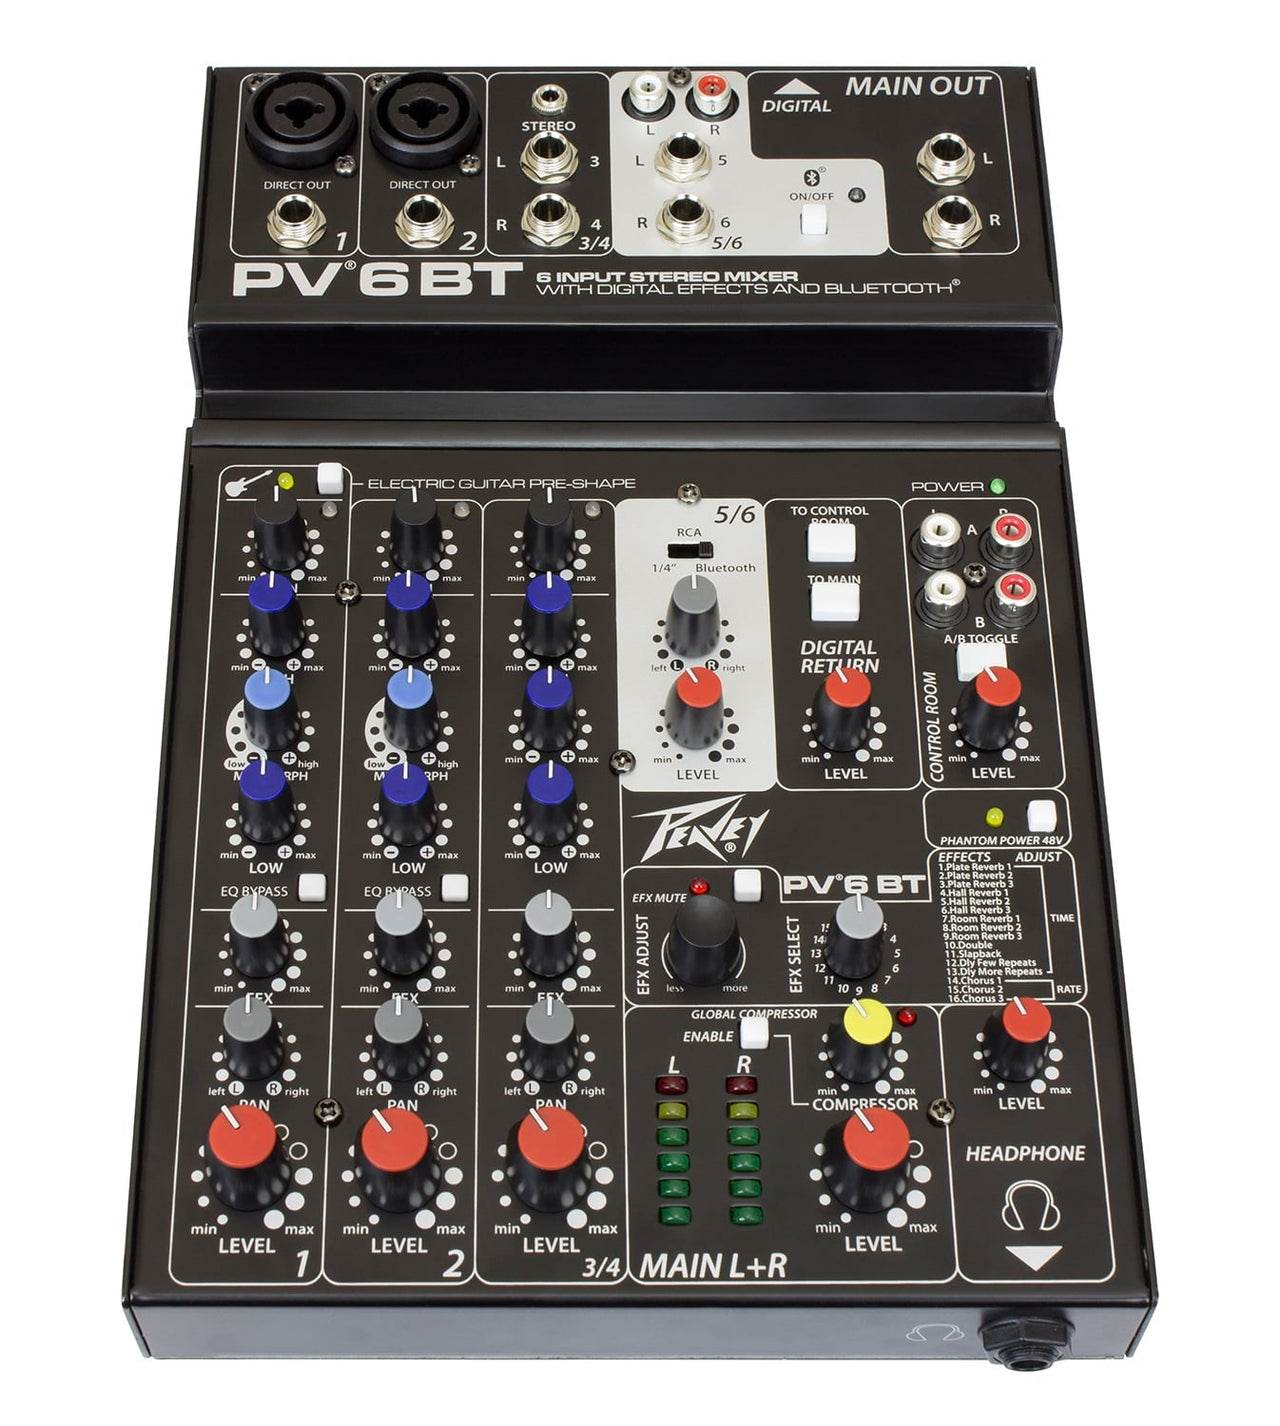 Peavey PV 6 BT 6 Channel Compact Mixing Mixer Console with Bluetooth + 4 XLR Cables